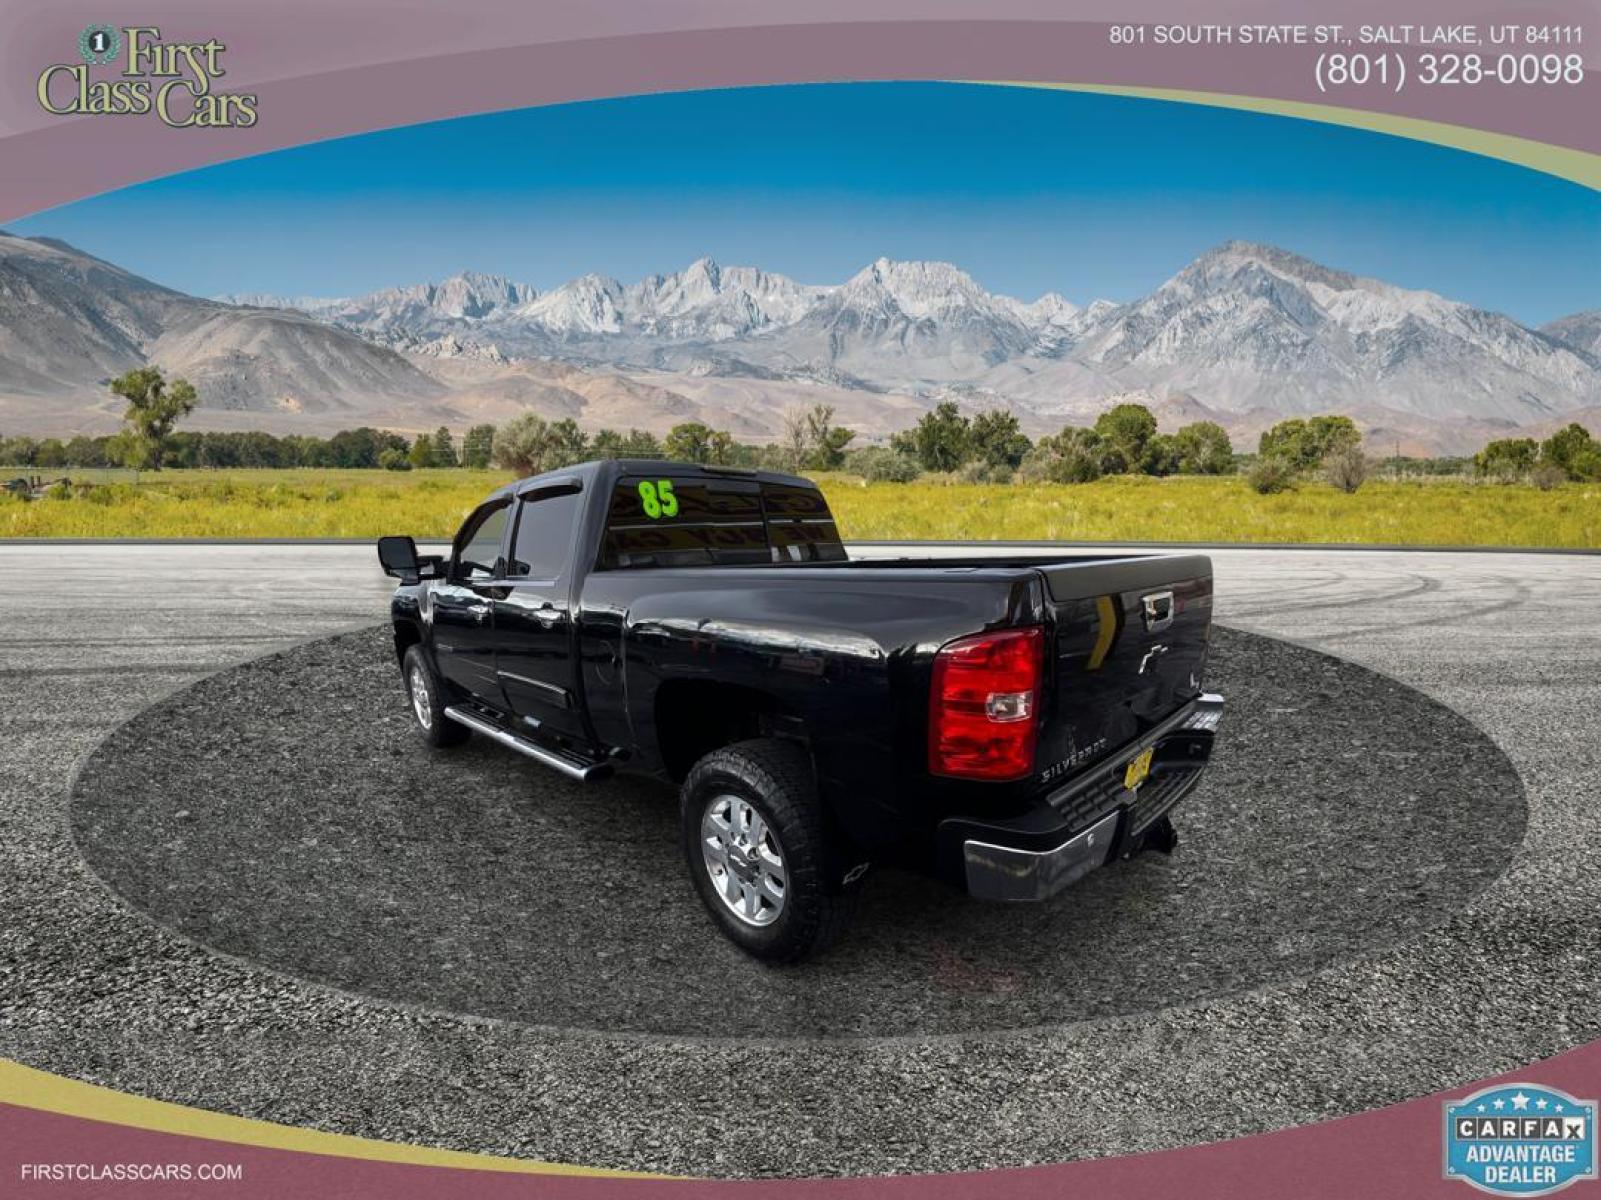 2012 Black /Black Chevrolet Silverado 3500HD (1GC4K1E81CF) , Allison Transmission transmission, located at 801 South State Street, Salt Lake City, UT, 84111, (801) 328-0098, 40.751953, -111.888206 - 3500HD LTZ DURAMAX DIESEL 6.6L, Loaded with features, 4x4, ALLISON TRANSMISSION, GREAT TIRES, BED LINER, LEATHER SEATS, BACKUP CAMERA, POWER SEATS, POWER LOCKS, POWER WINDOWS, Parking Sensors, AM/FM Aux input, Blutooth, GPS Navigation system, Rear Entertainment system, - Photo #5